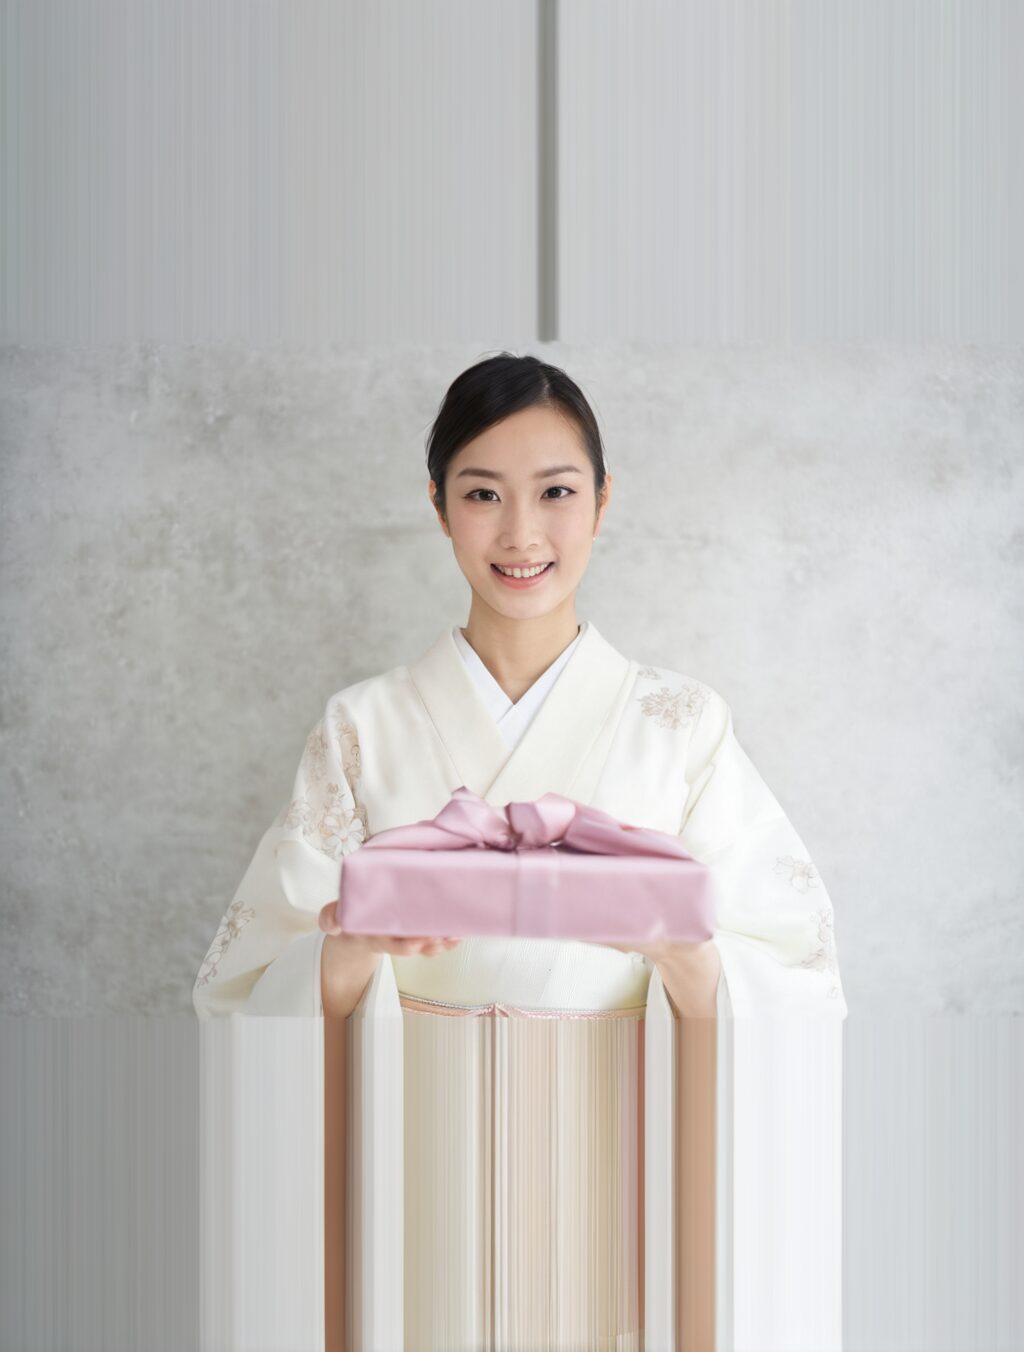 gift giving etiquette in japan business